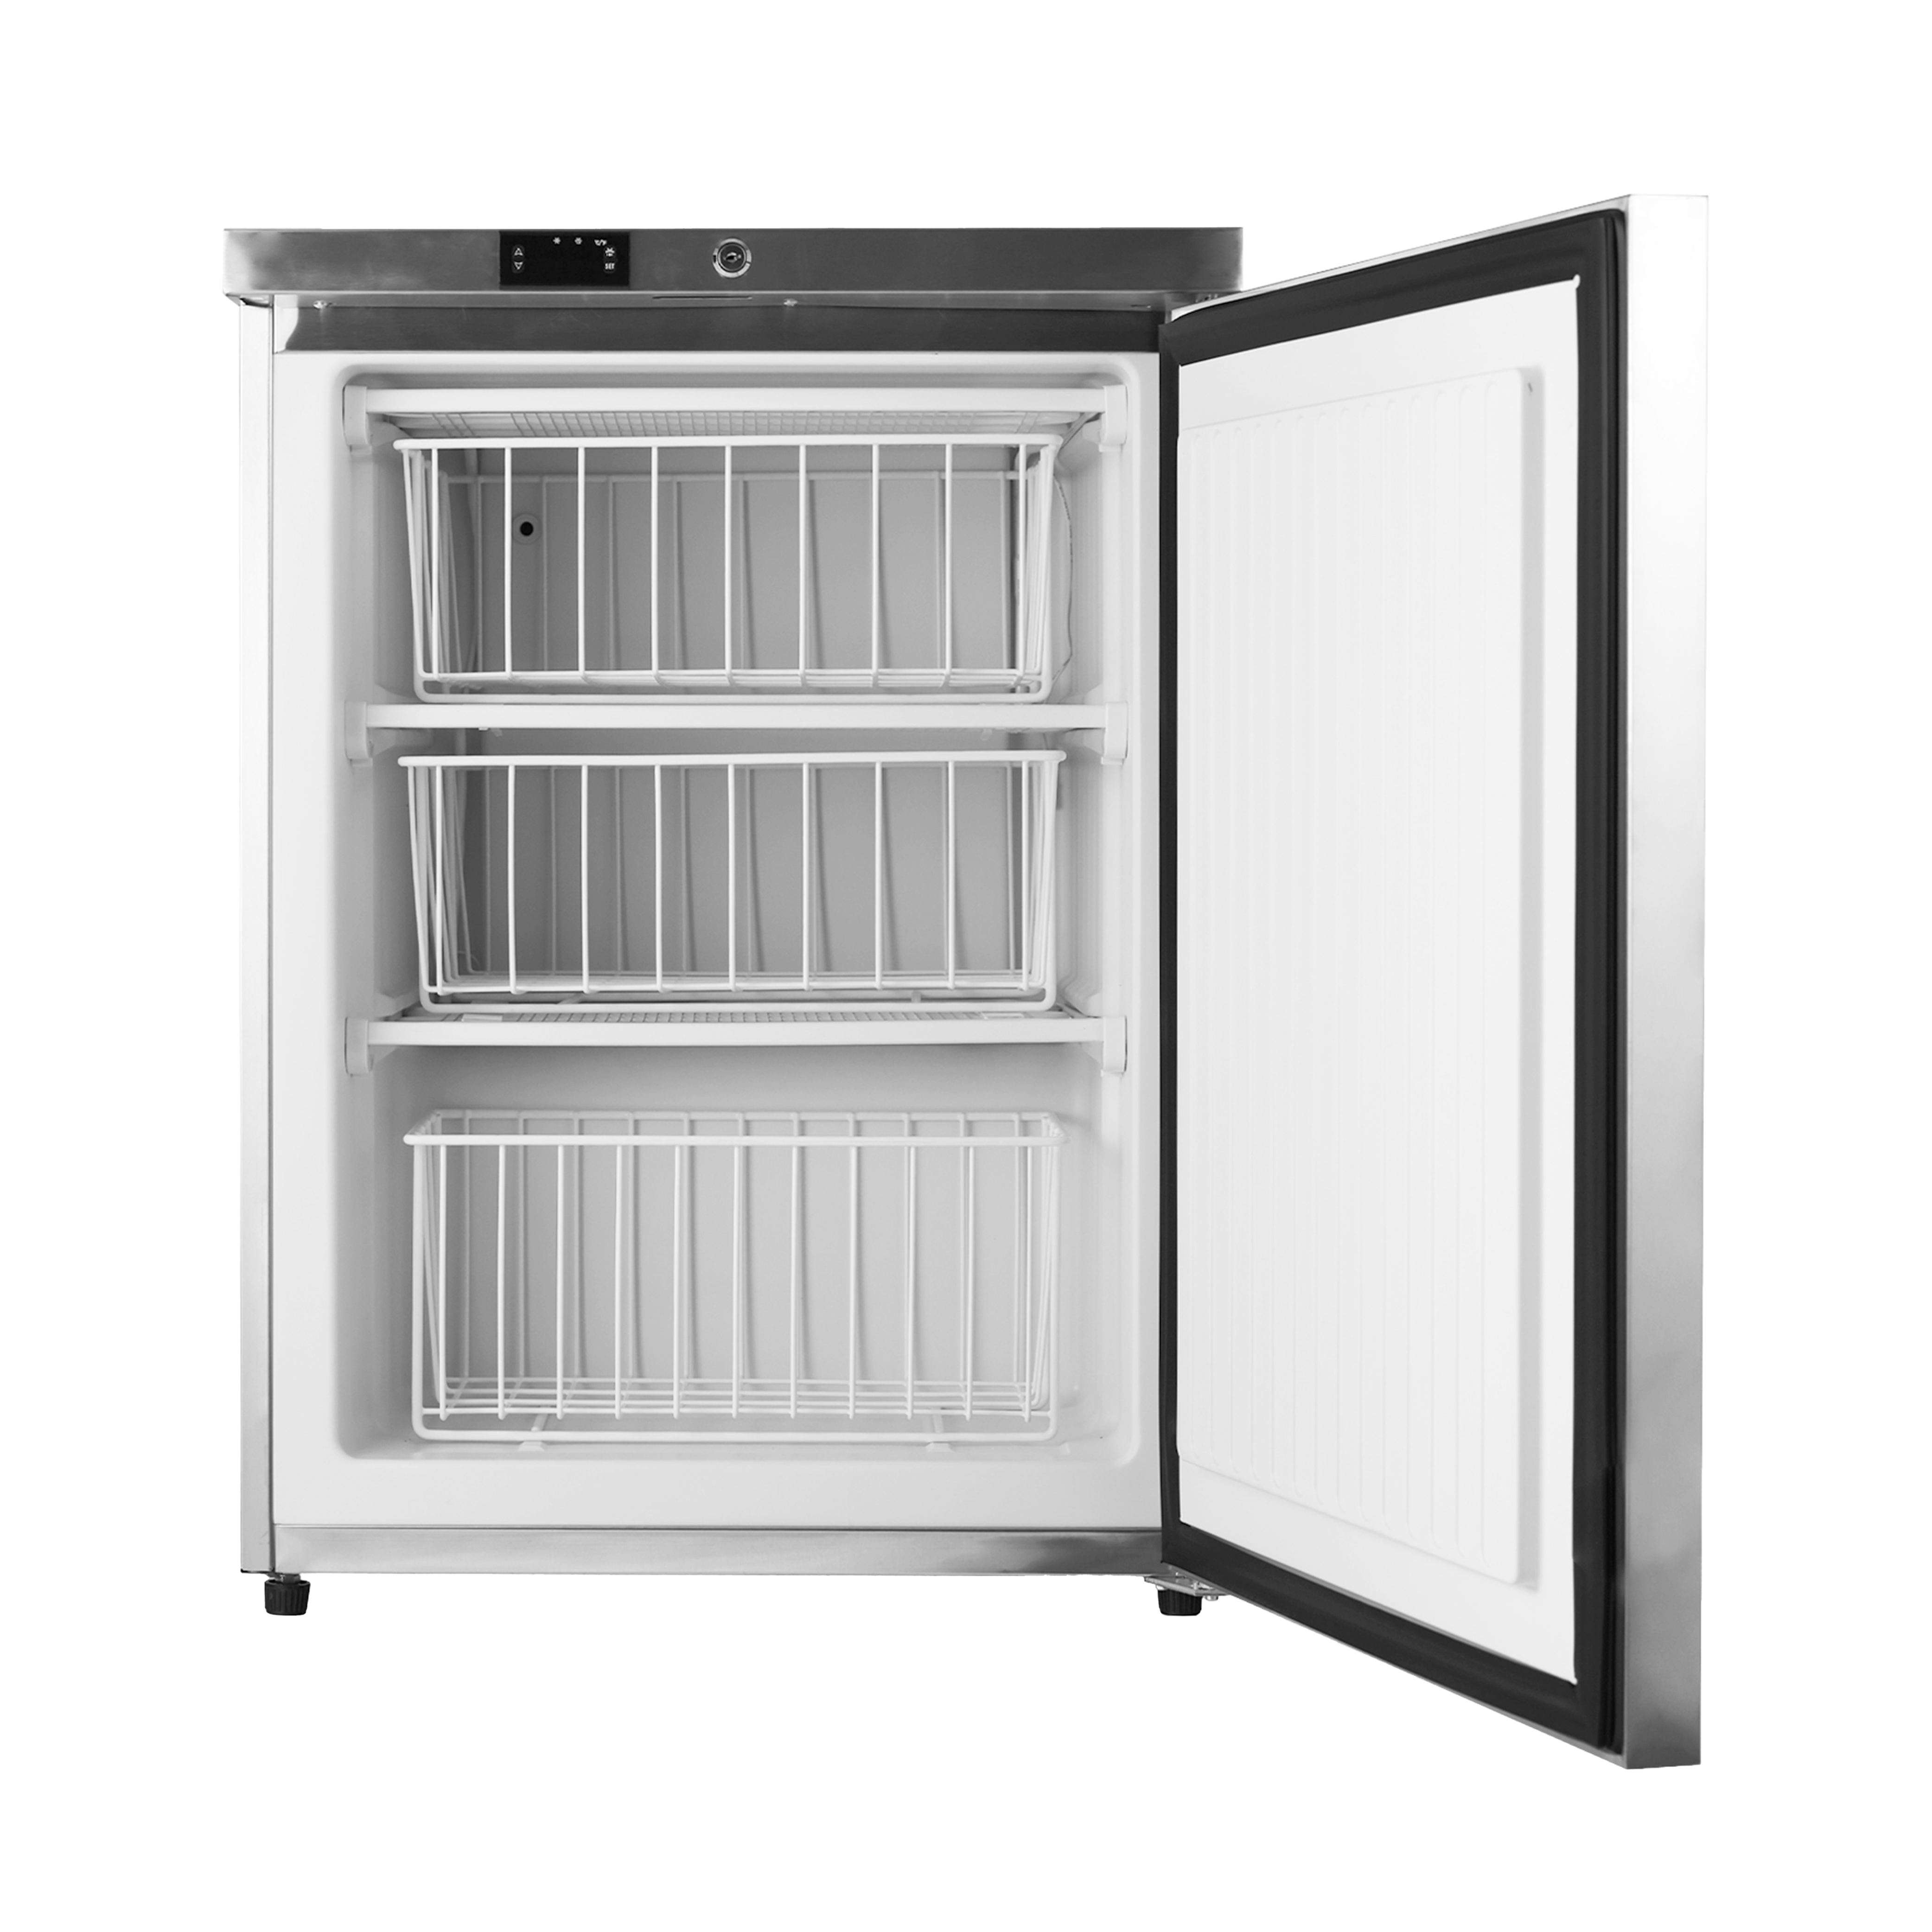 Front view of a 4.1 Cu Ft Food Service Outdoor Beverage Fridge Freezer 128 cans, featuring interior space with three drawers